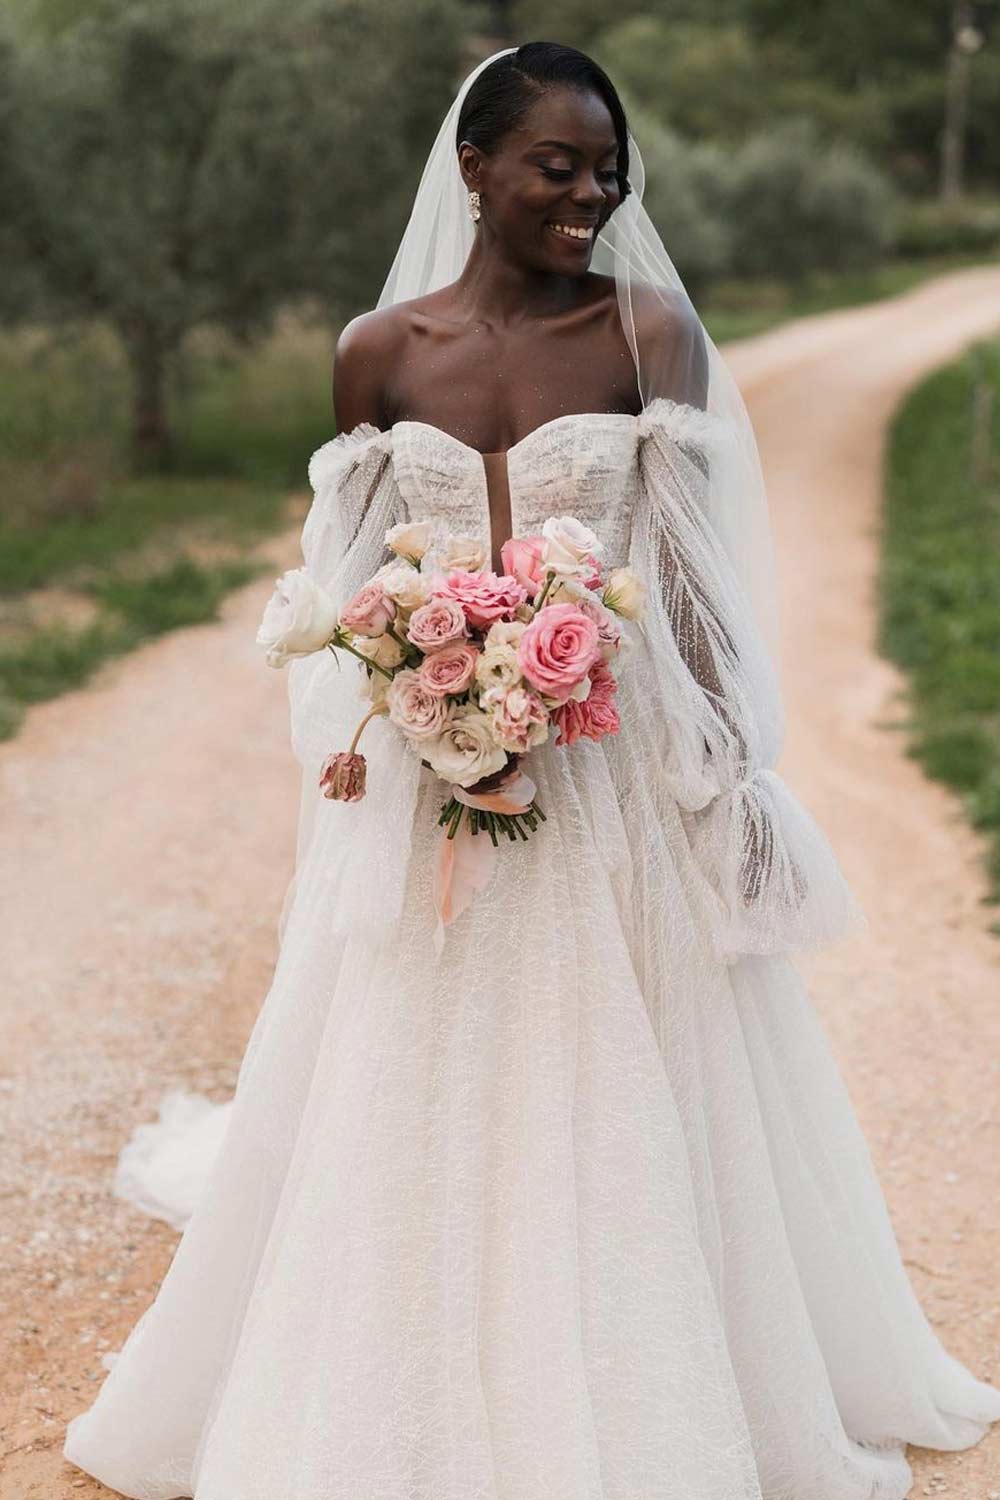 Off the Shoulders Wedding Dress with Long Sleeves